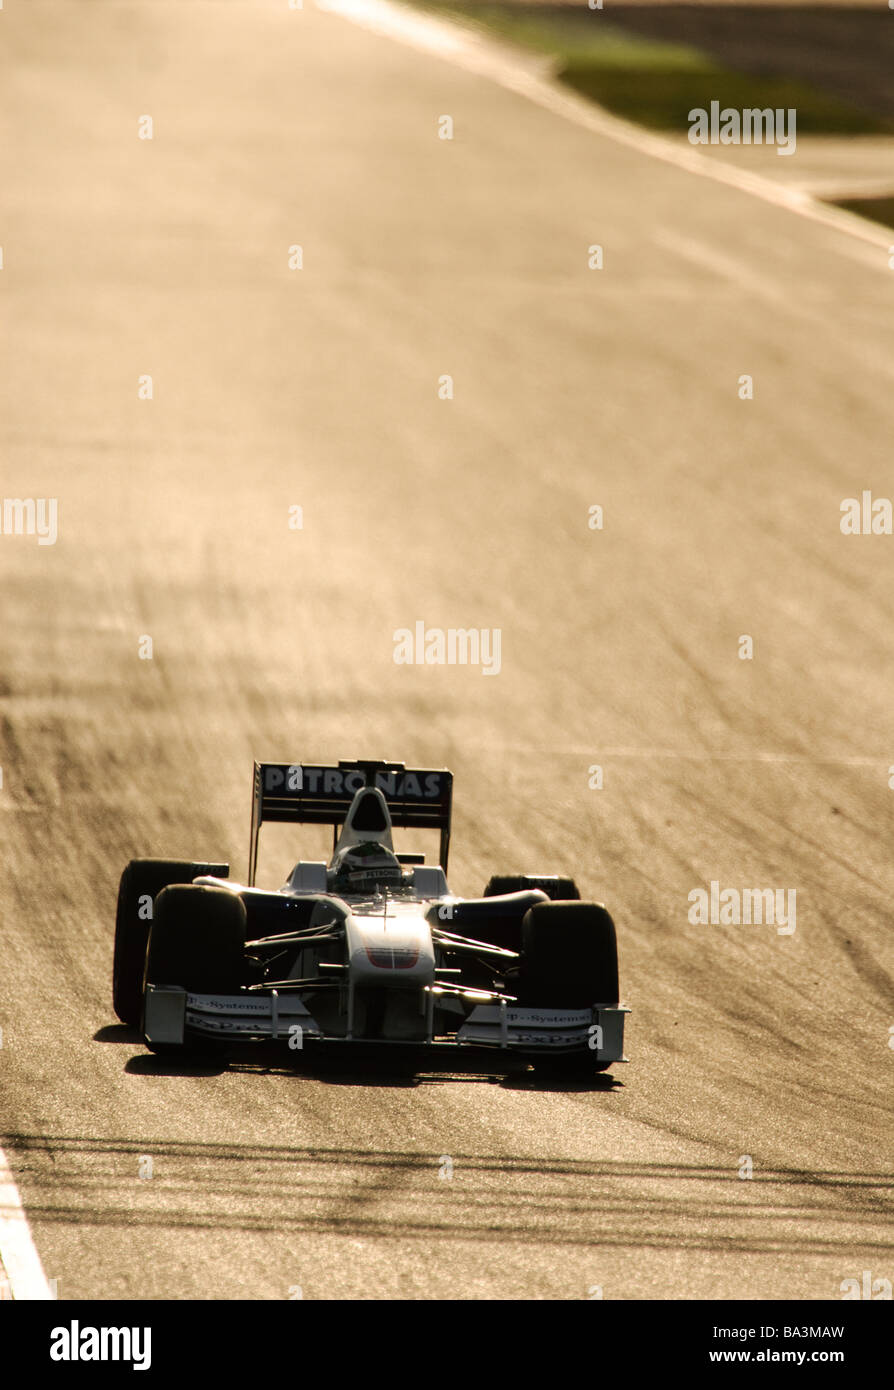 Nick HEIDFELD in the BMW F1 09 race car during Formula One testing sessions in March 2009 Stock Photo